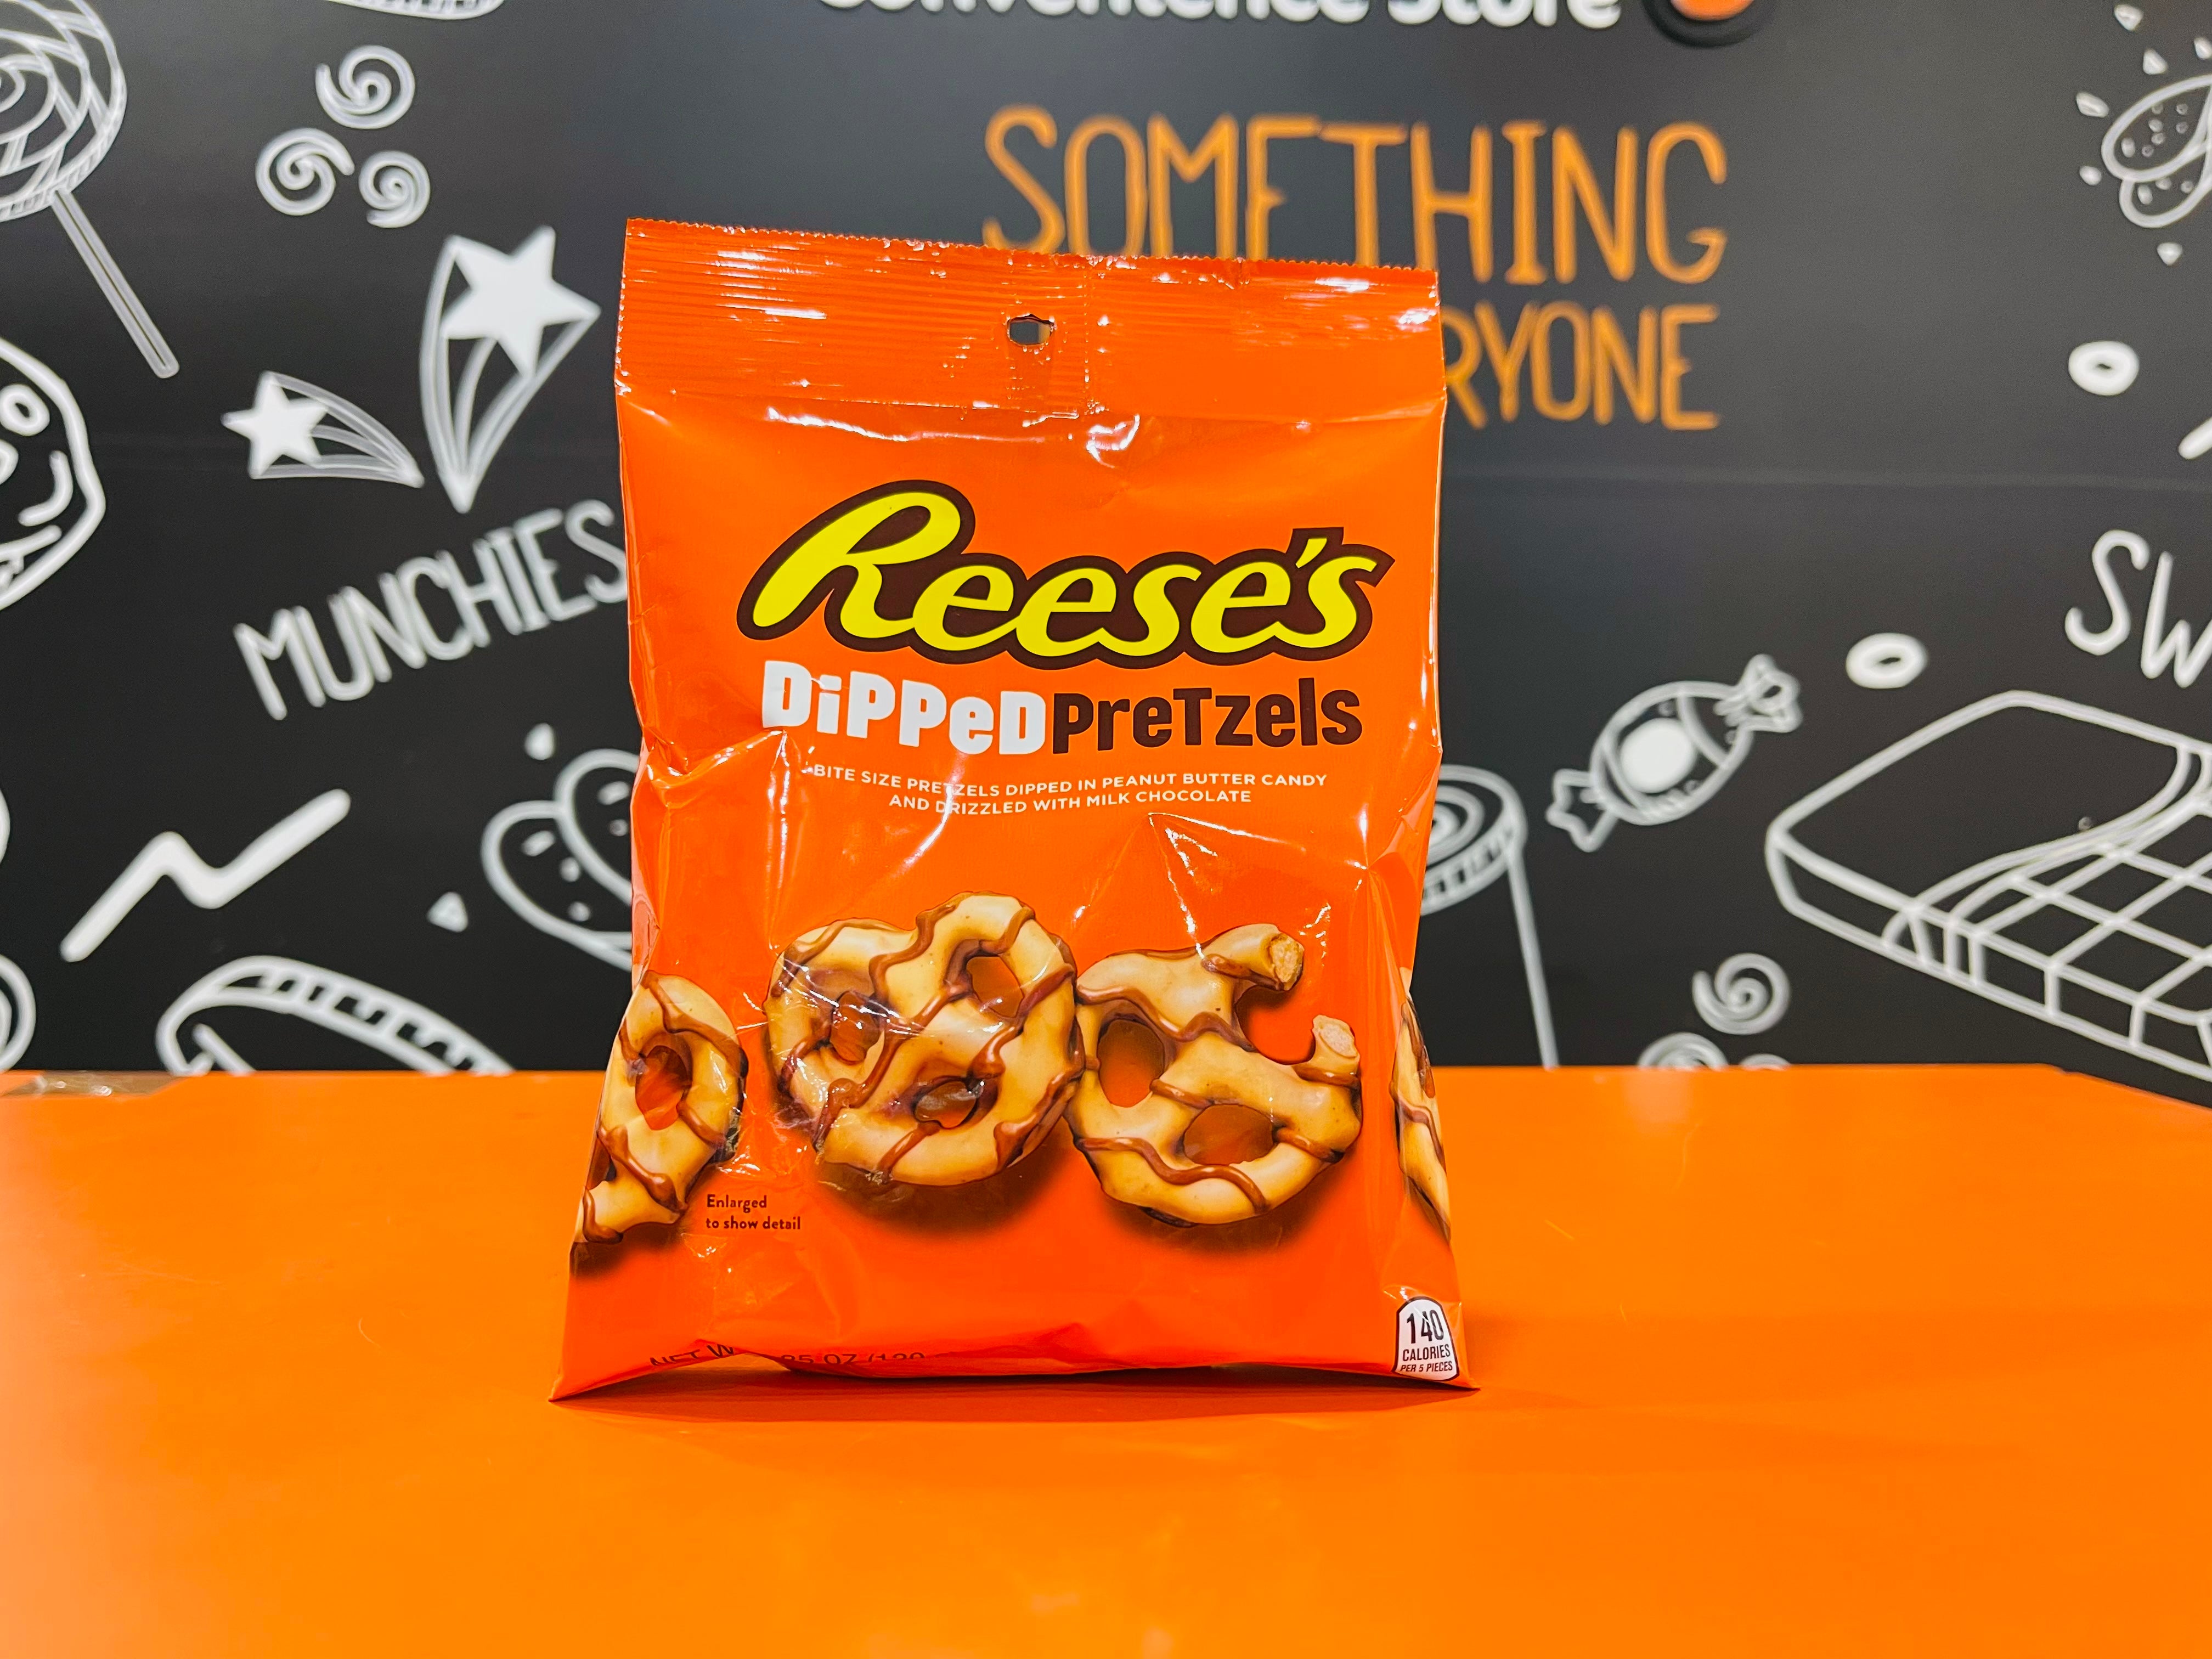 Reese’s Dipped Pretzels 120g